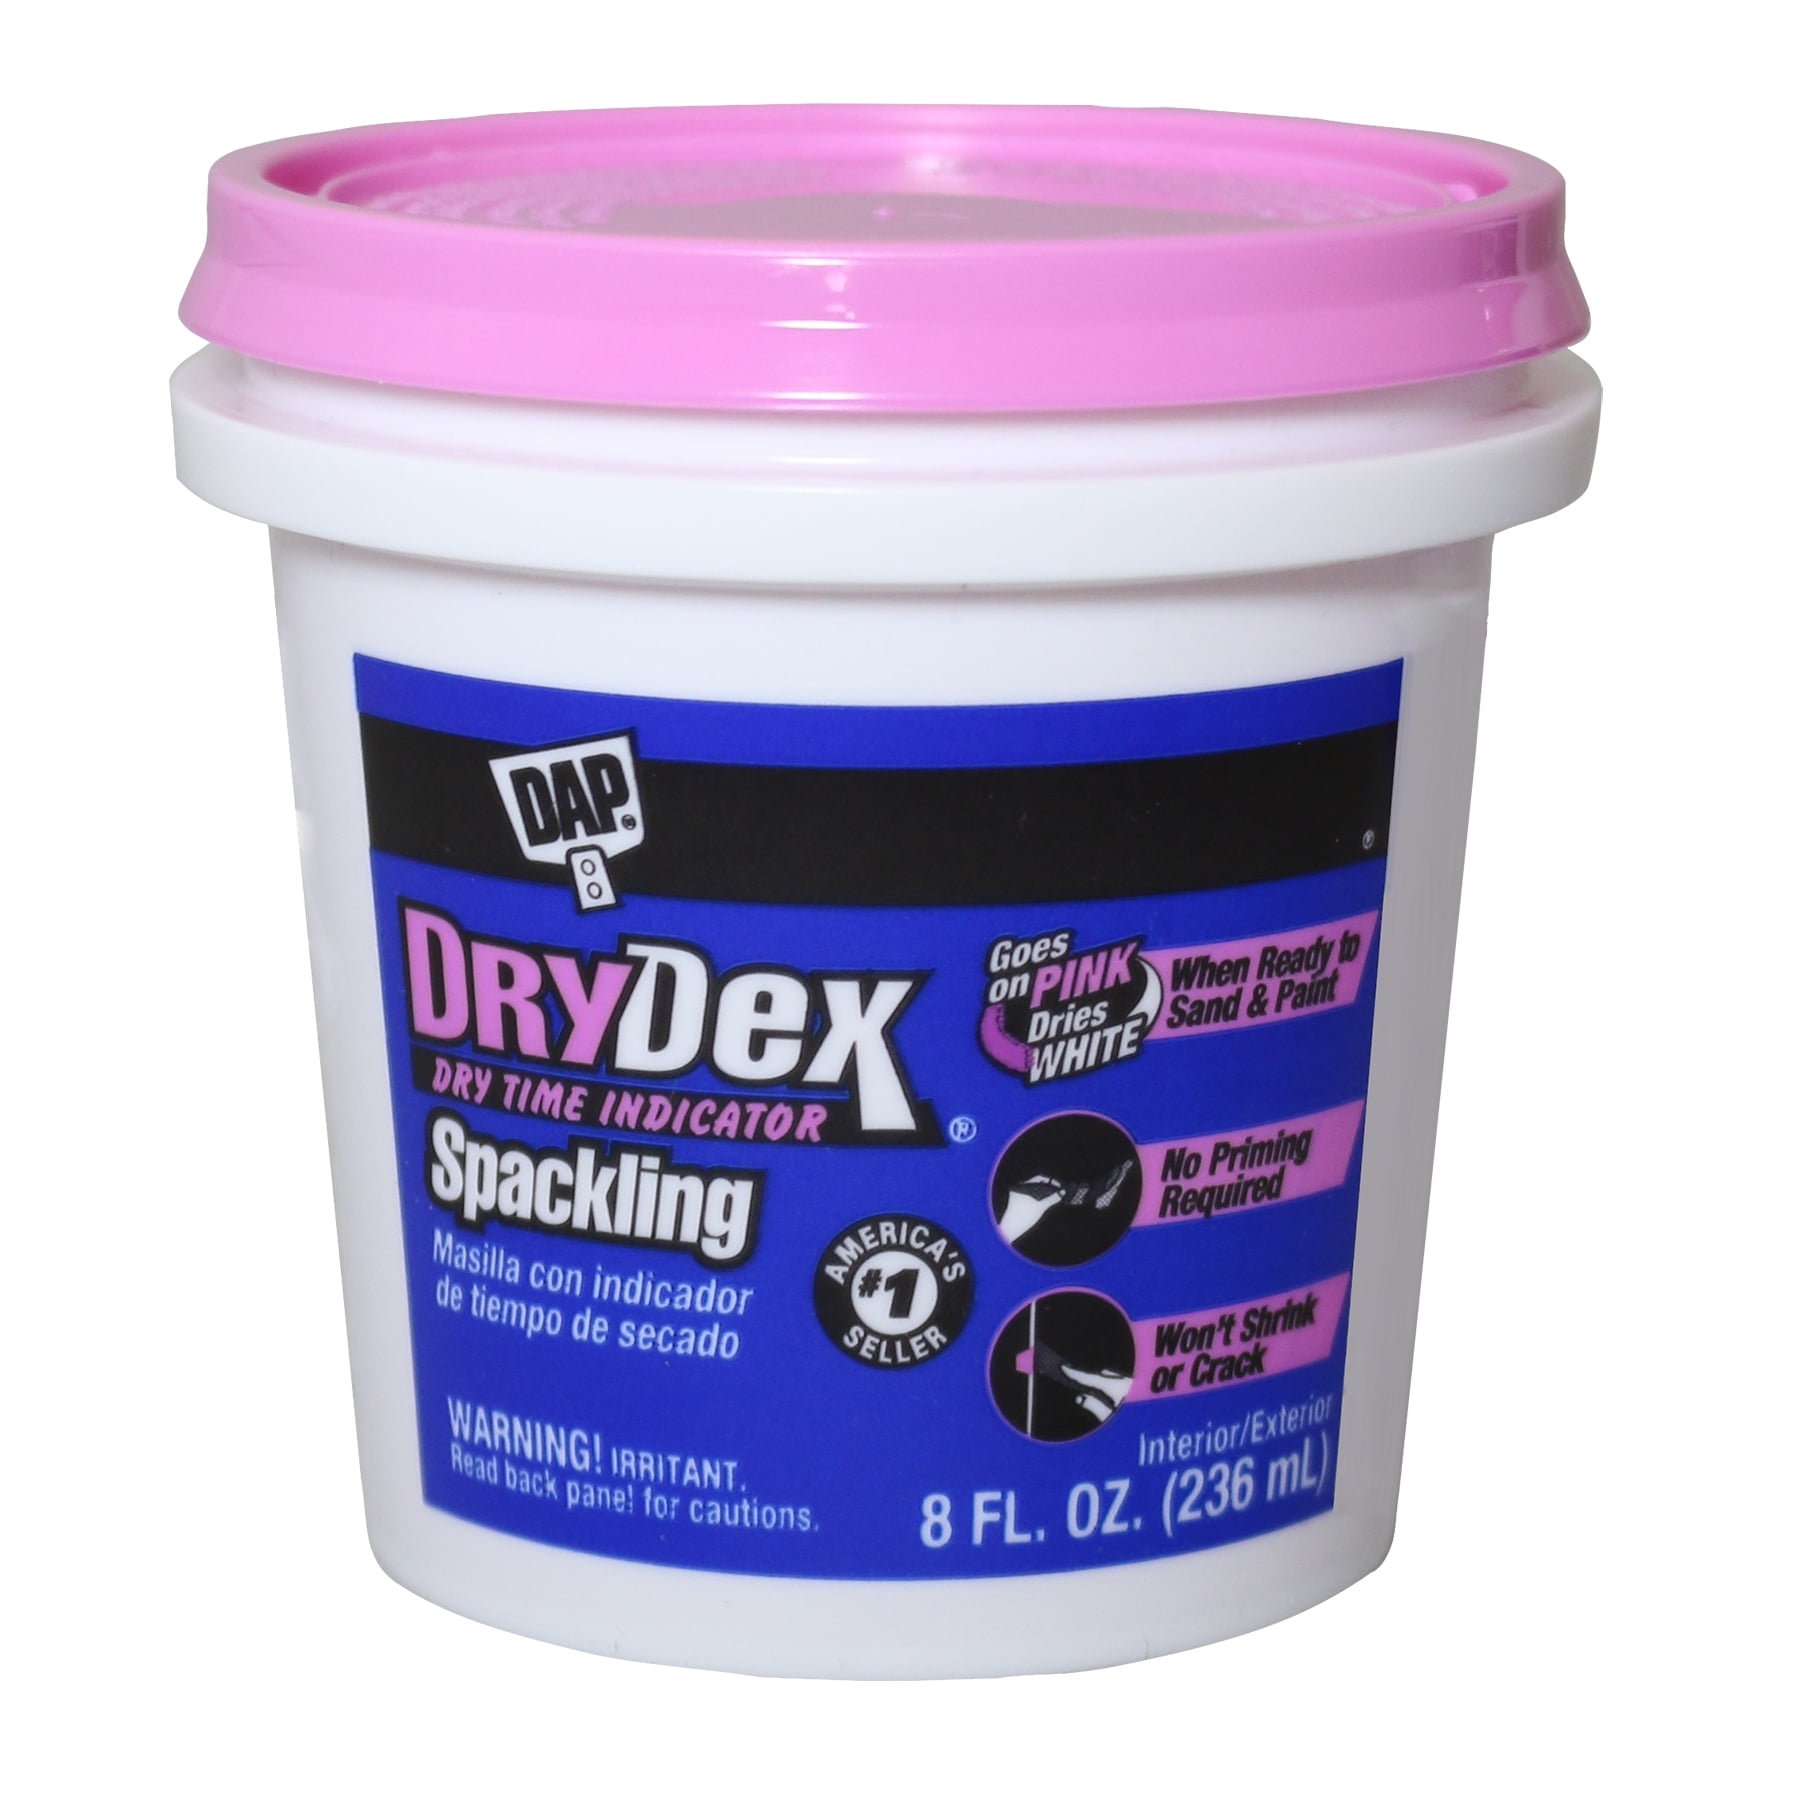 DAP DryDex Spackle, 8 oz Dry Time Indicator Spackling Paste repairs holes and cracks in dry wall, plaster, wood, and stone